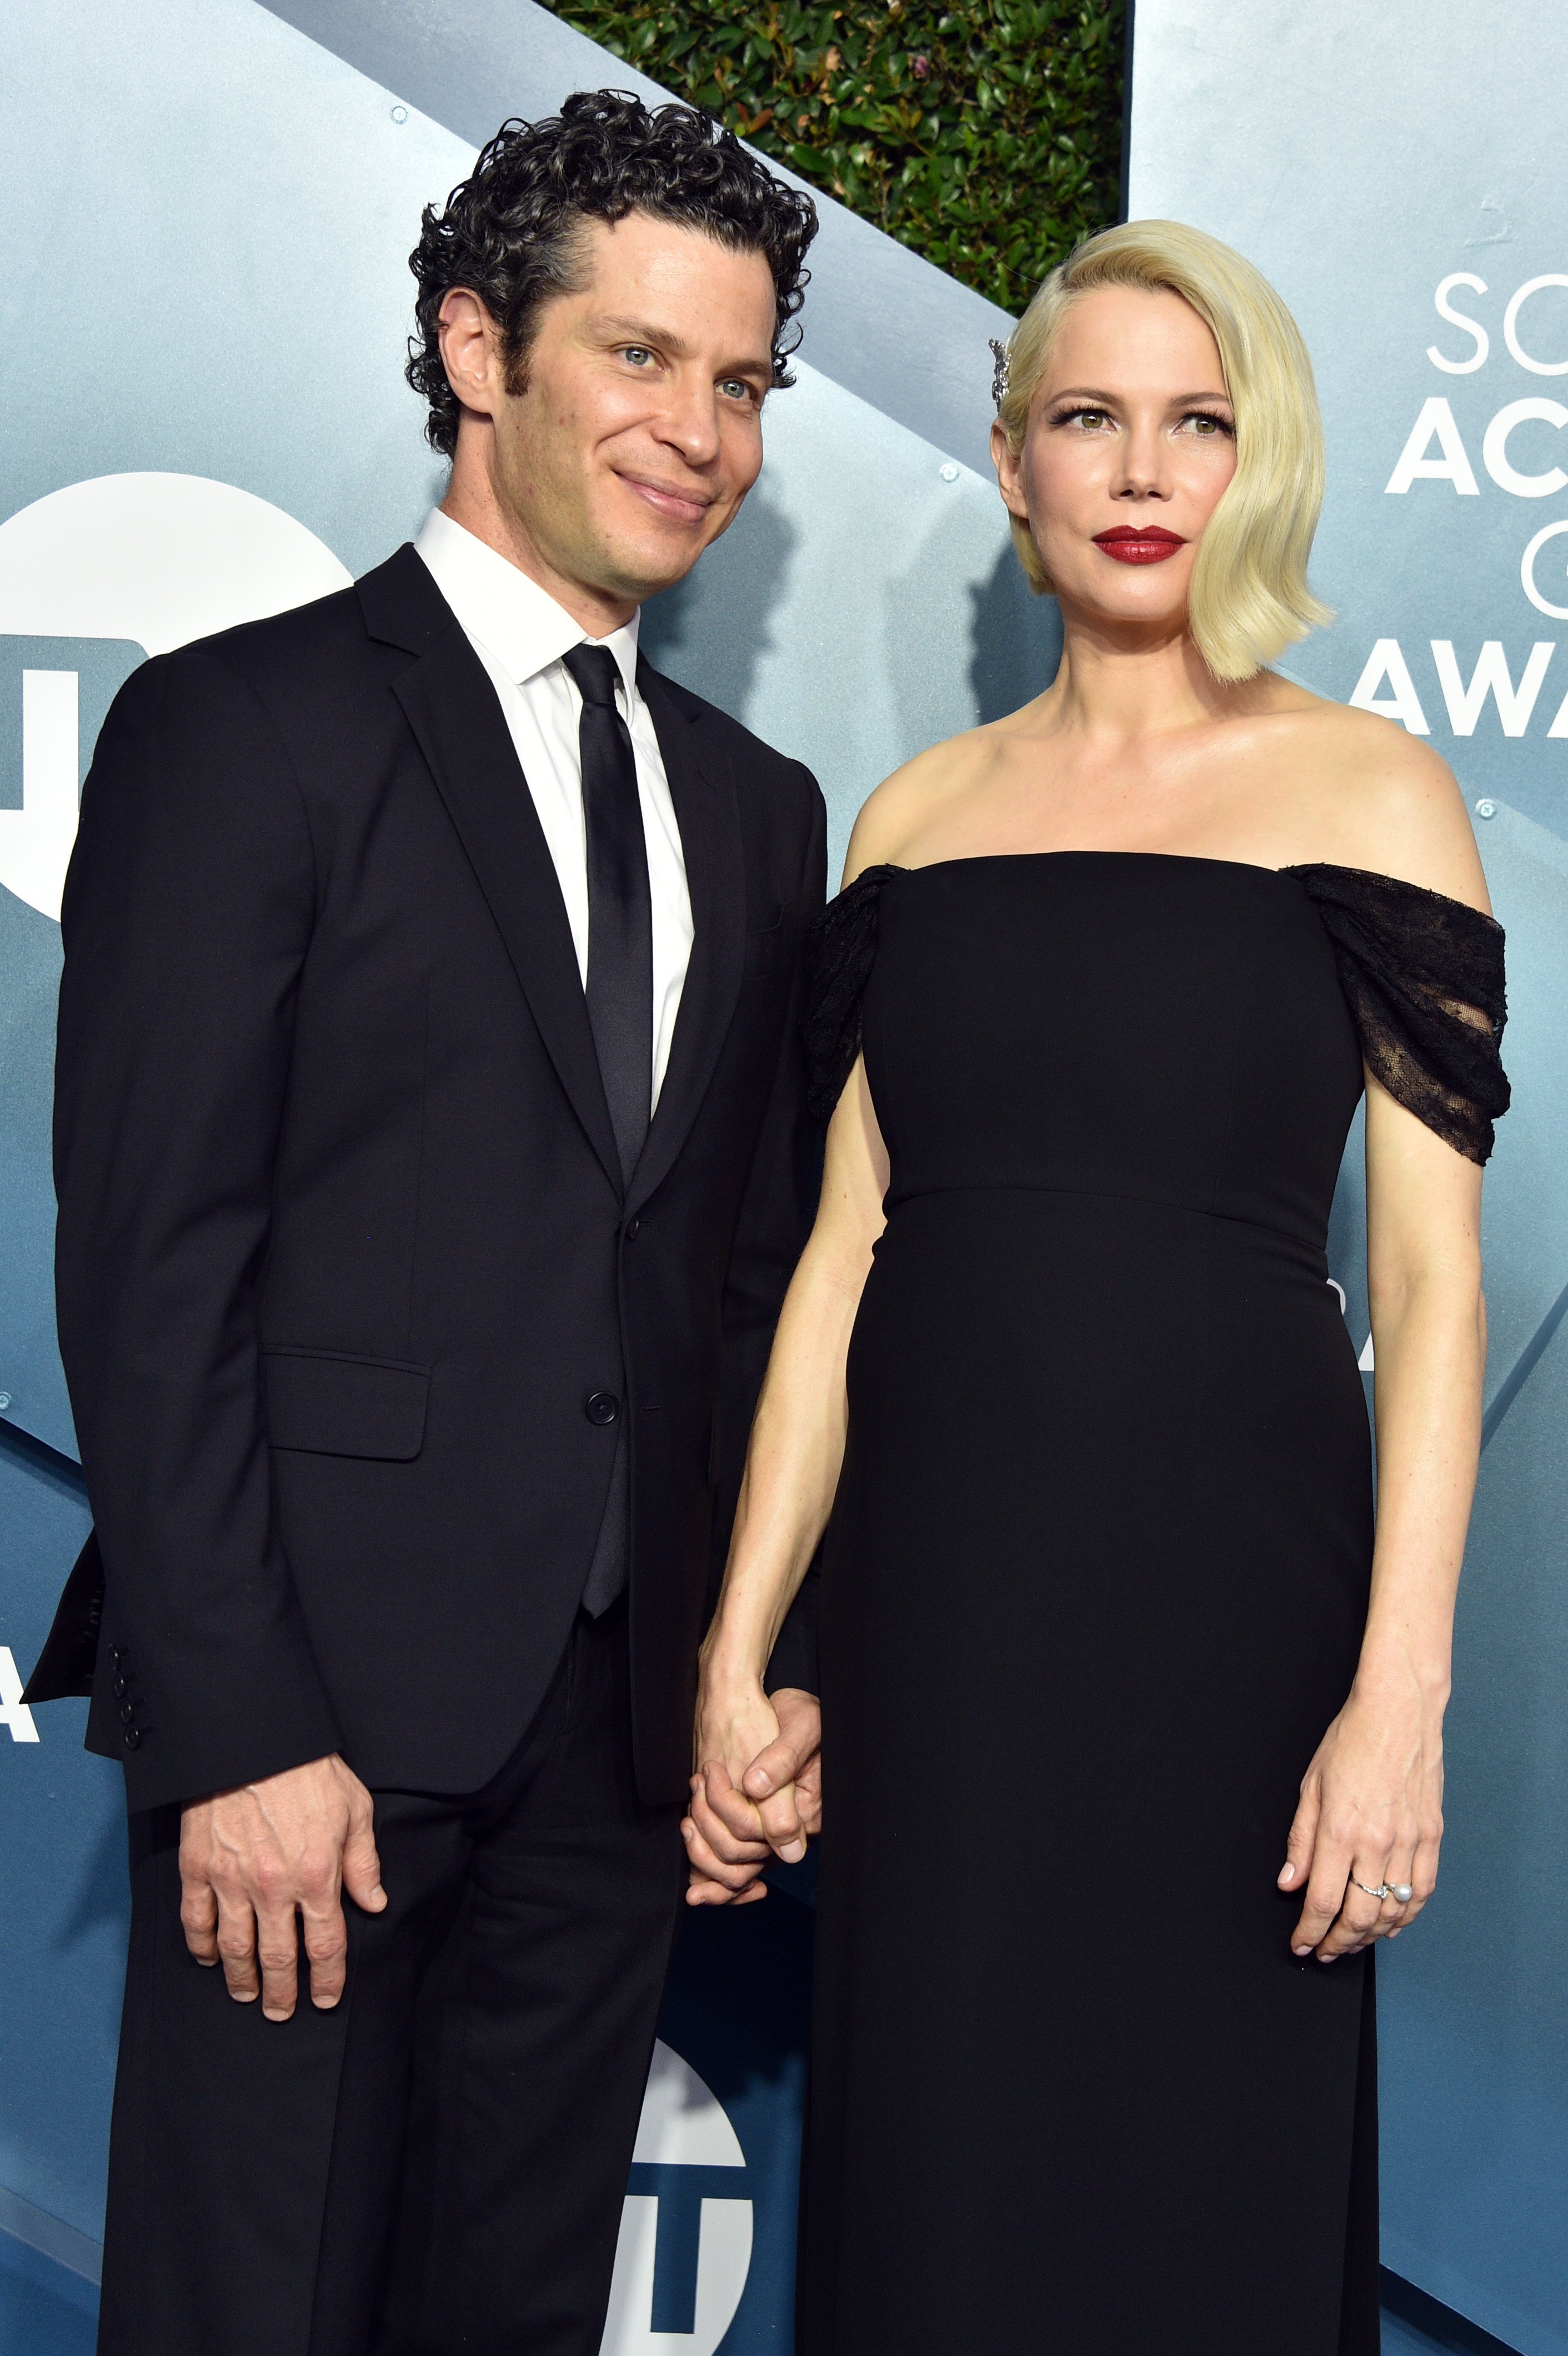 Thomas Kail and Michelle Williams at the 26th Annual Screen Actors Guild Awards on January 19, 2020 | Source: Getty Images